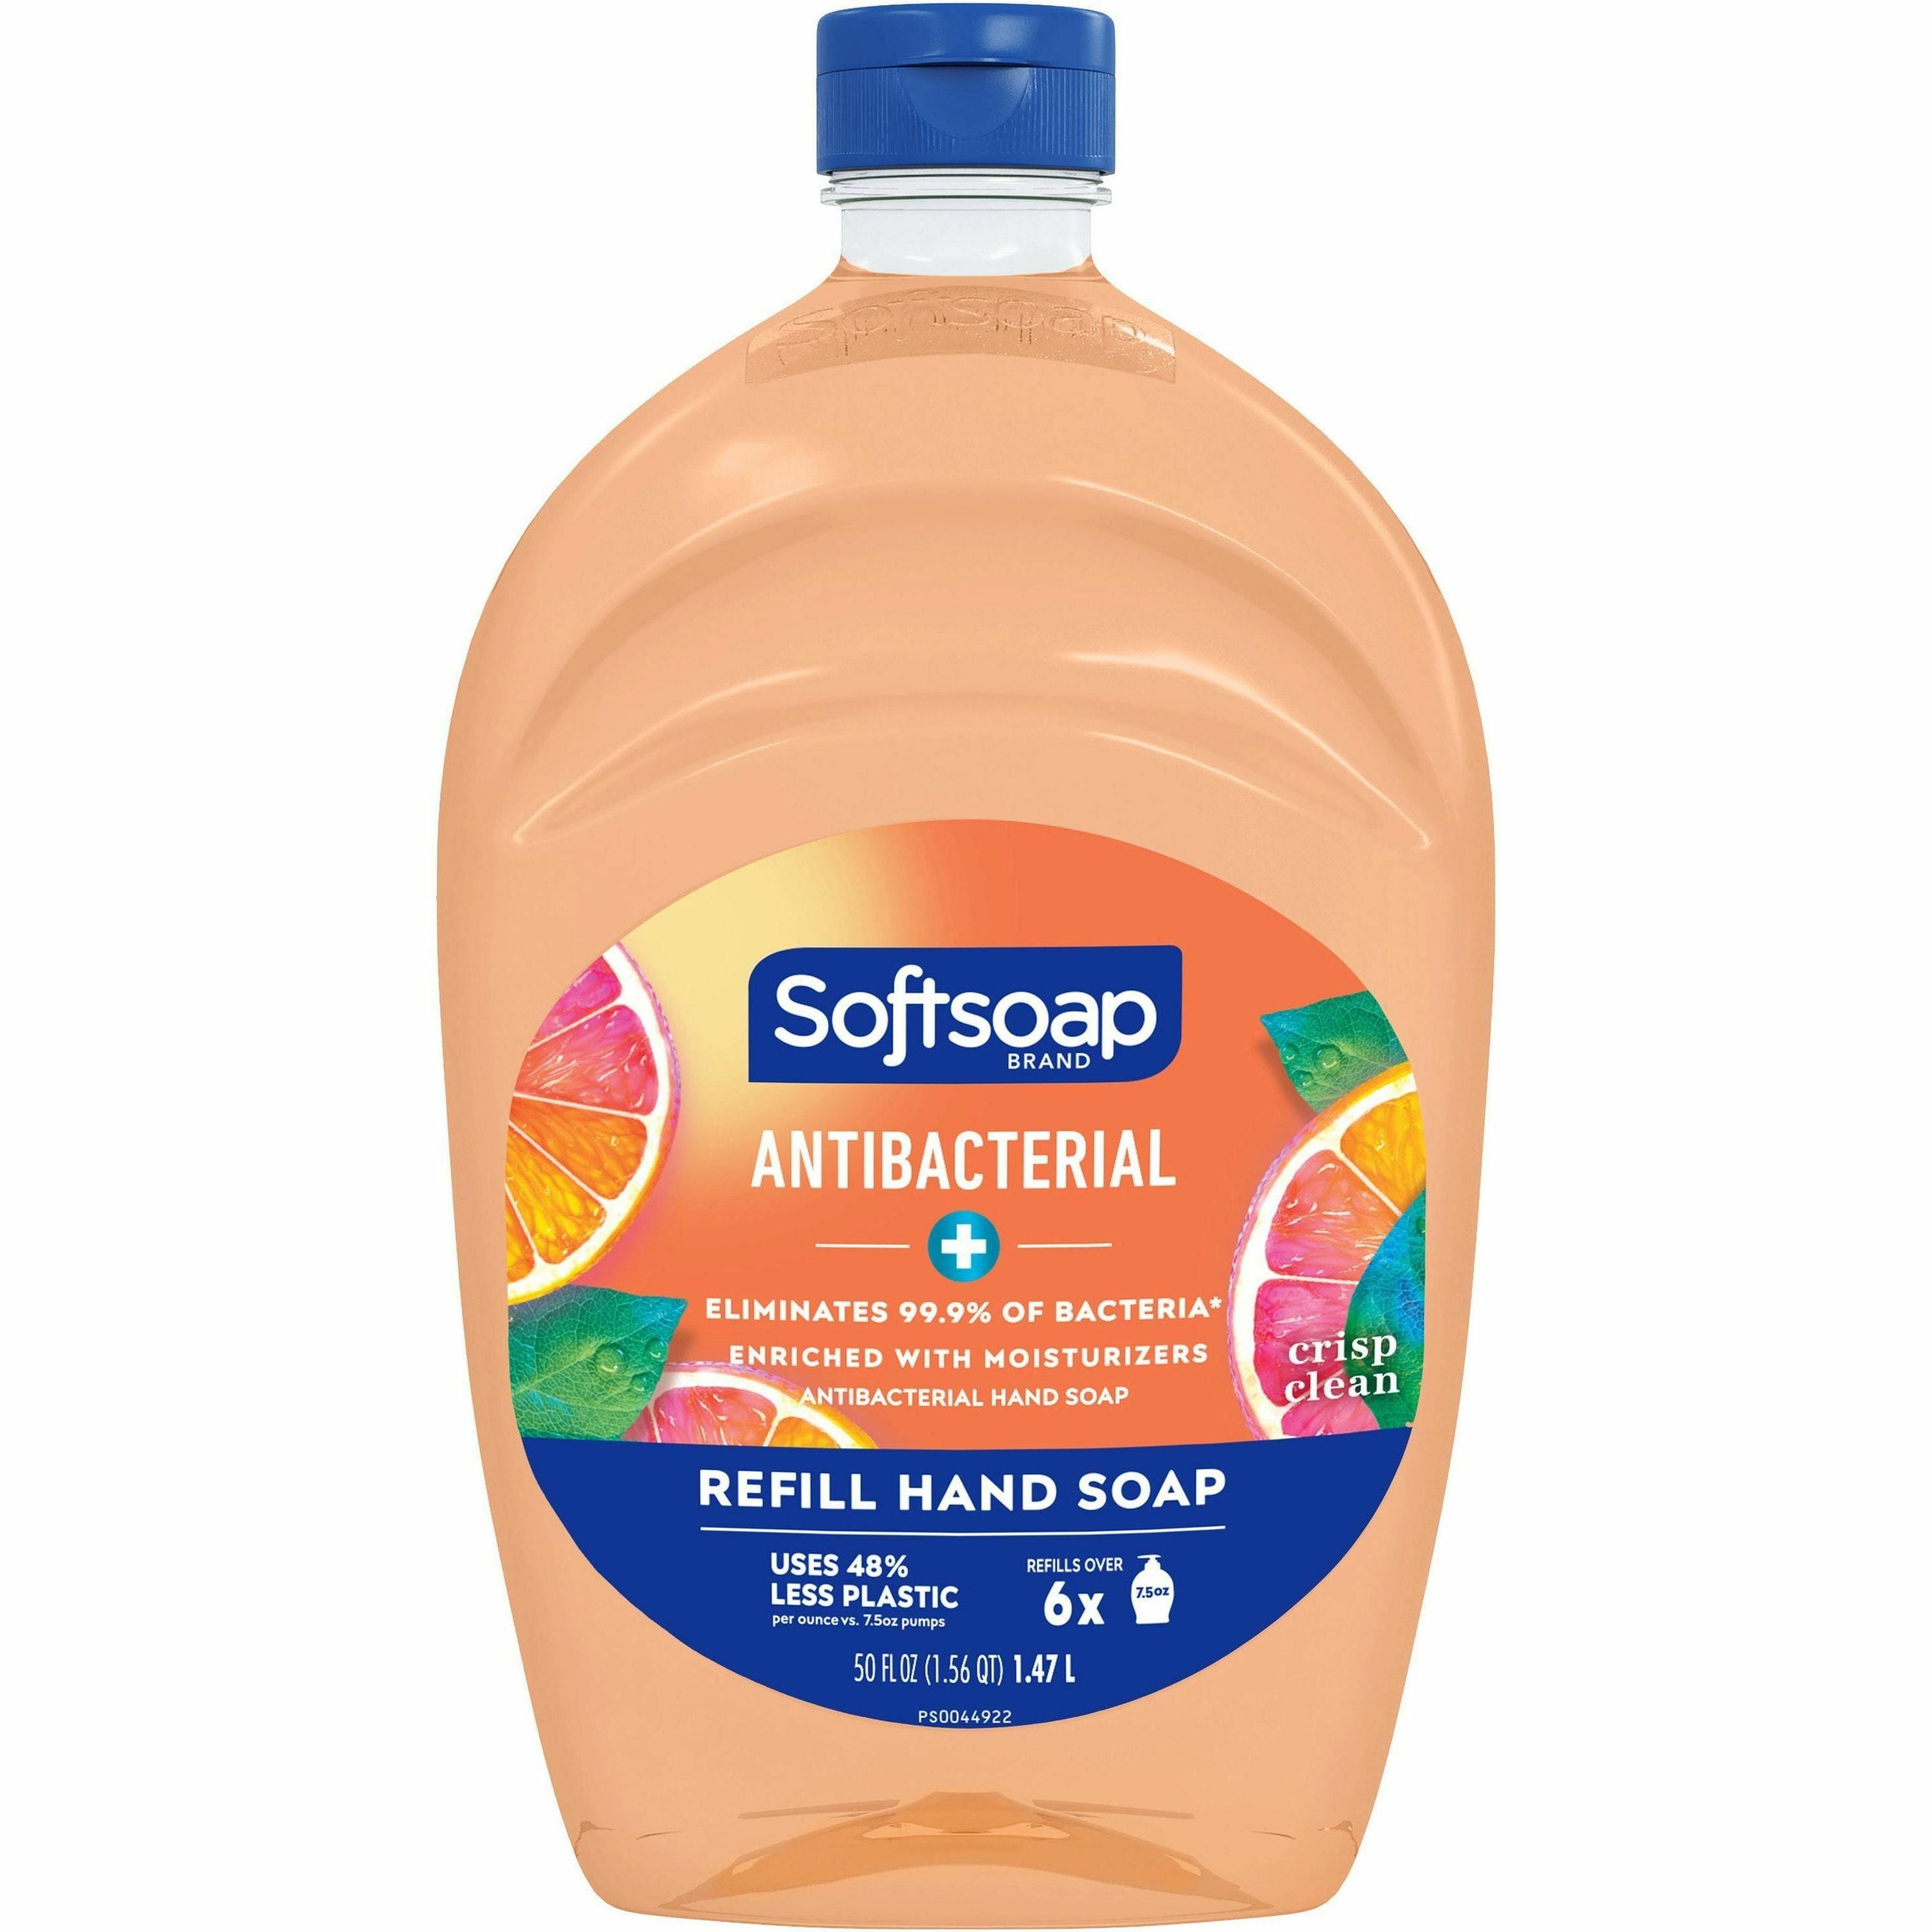 softsoap-antibacterial-hand-soap_cpcus05261act - 3